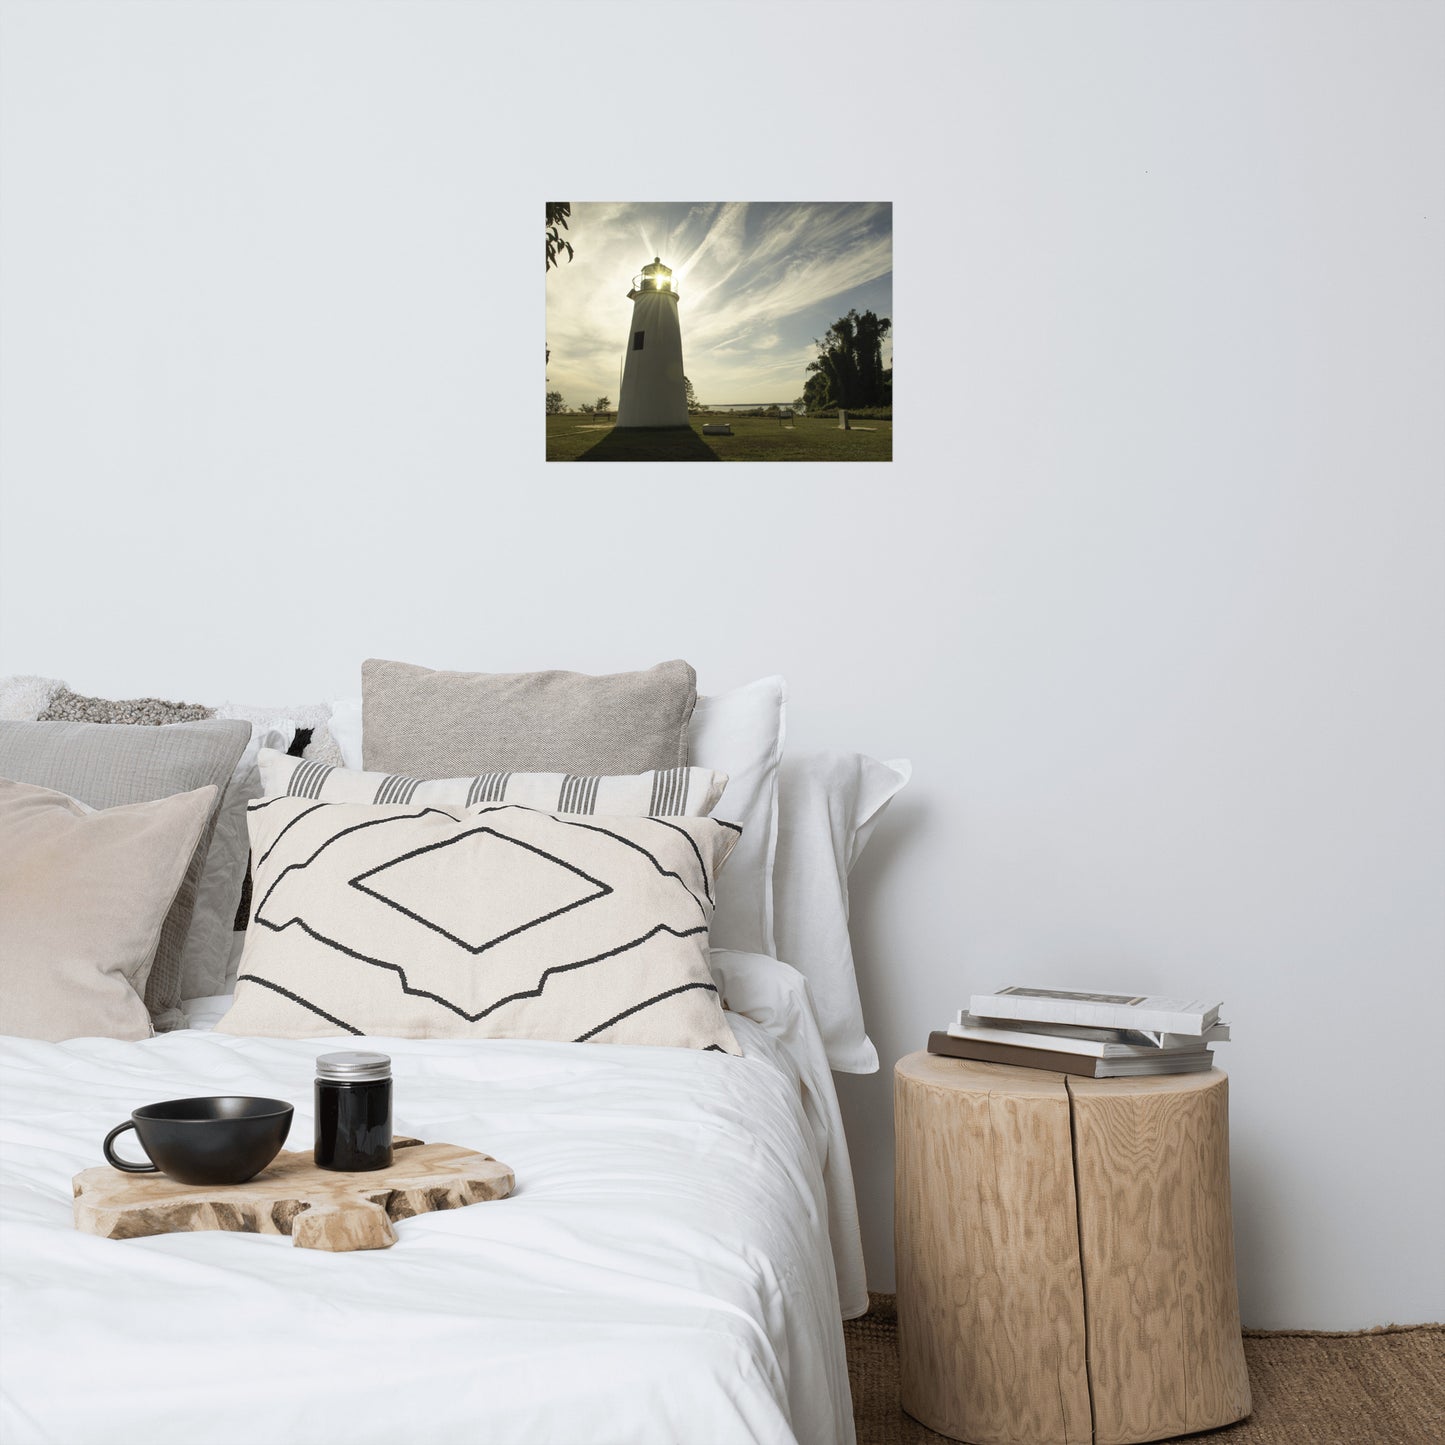 Turkey Point Lighthouse with Sun Flare Horizontal Loose Wall Art Prints